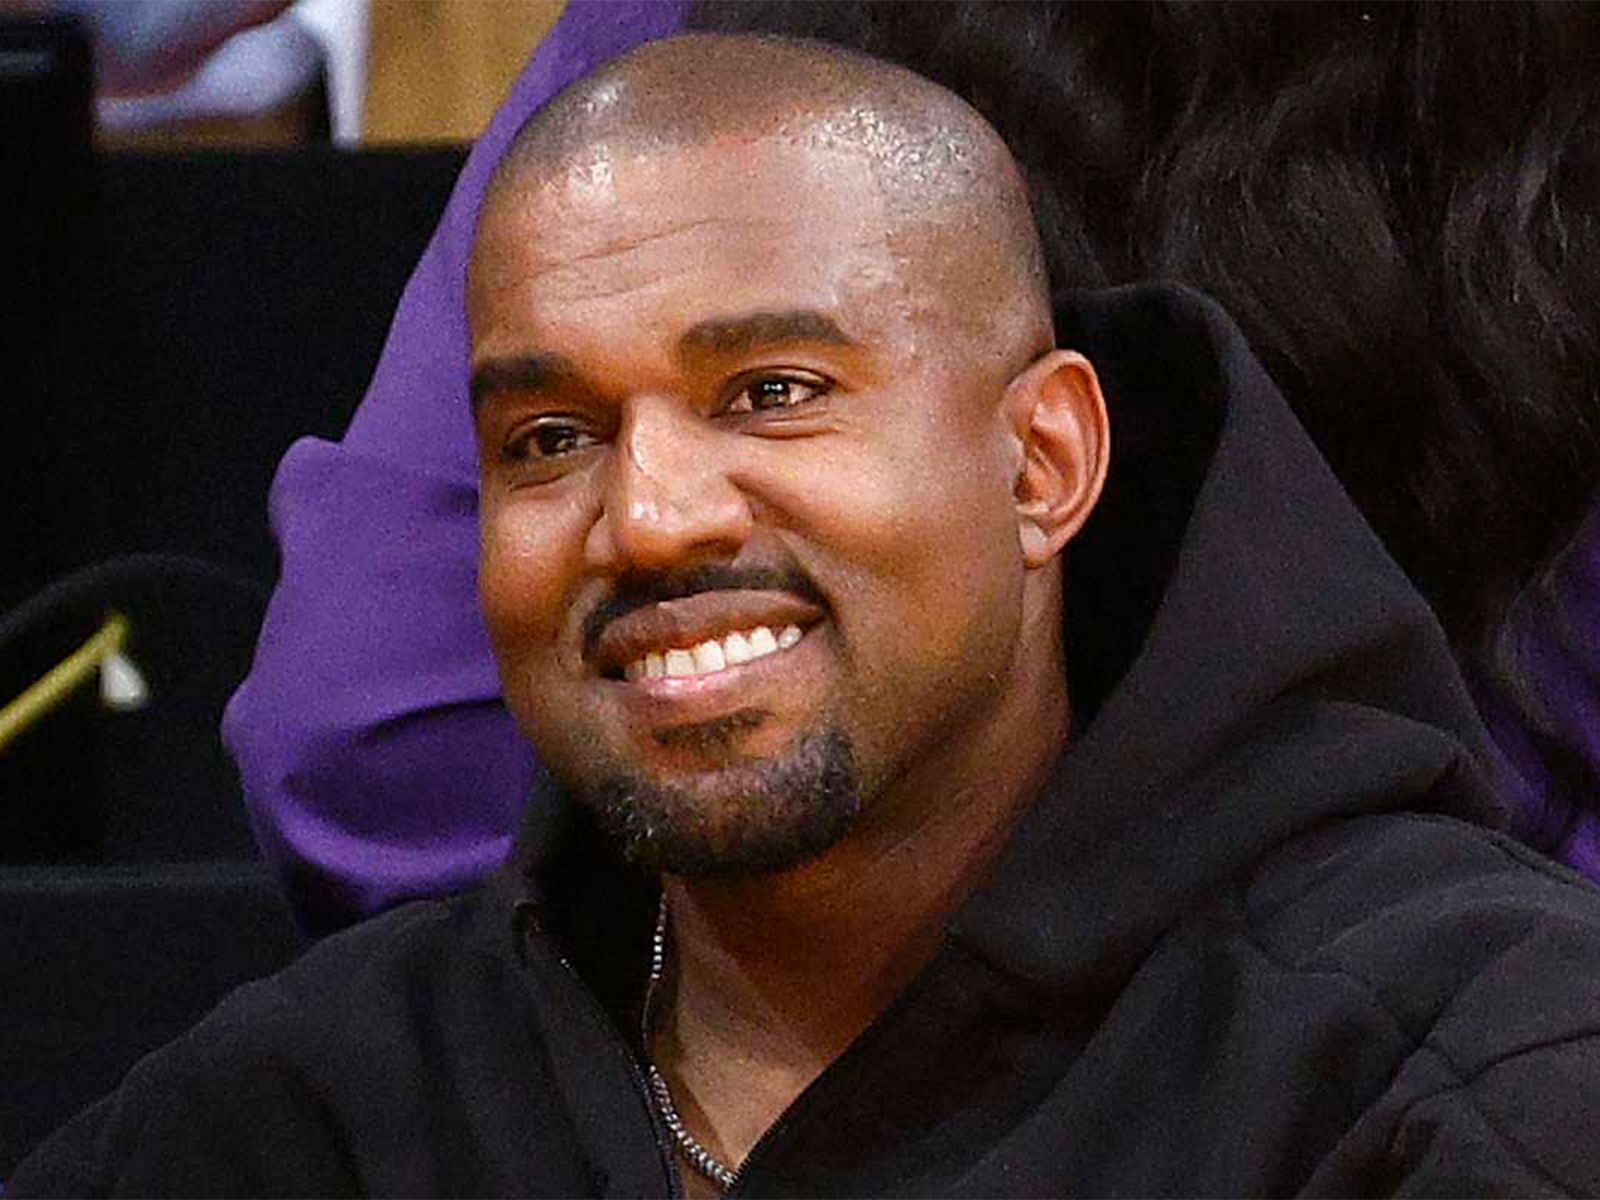 Kanye West requests a new logo for his clothing label